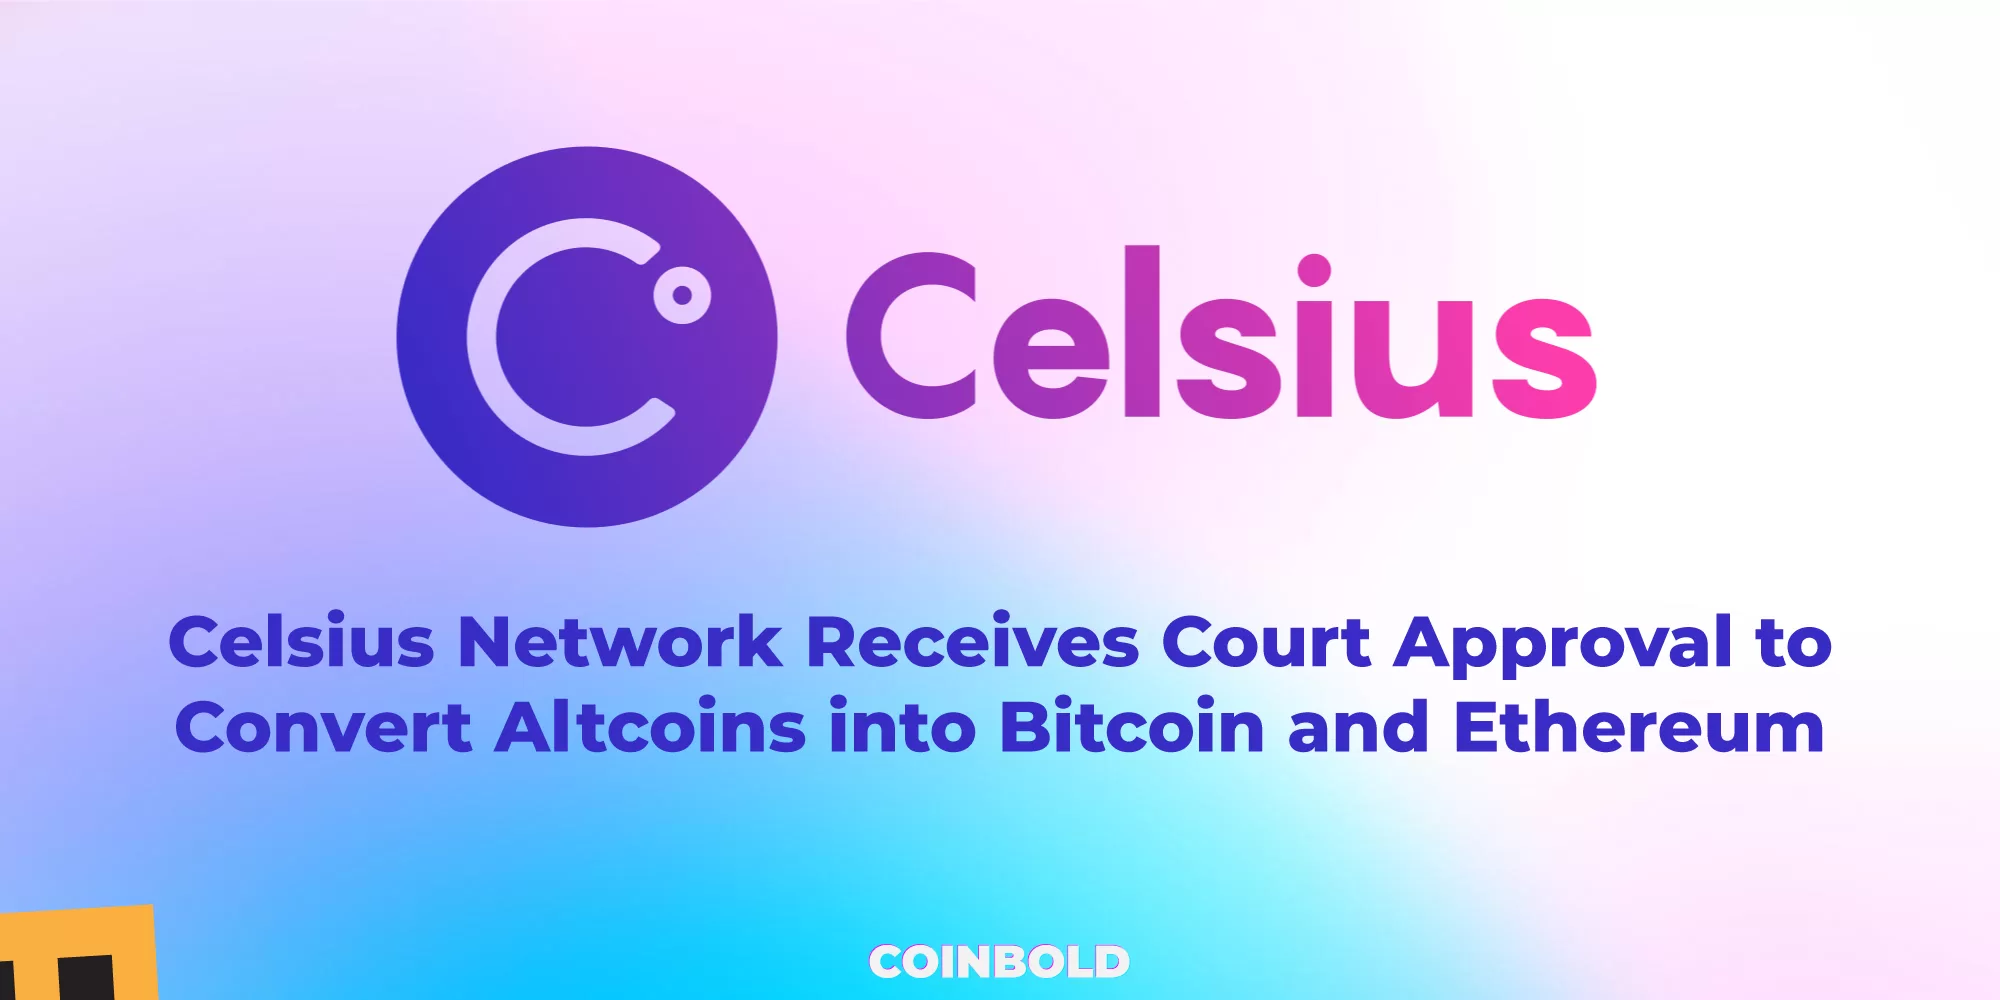 Celsius Network Receives Court Approval to Convert Altcoins into Bitcoin and Ethereum